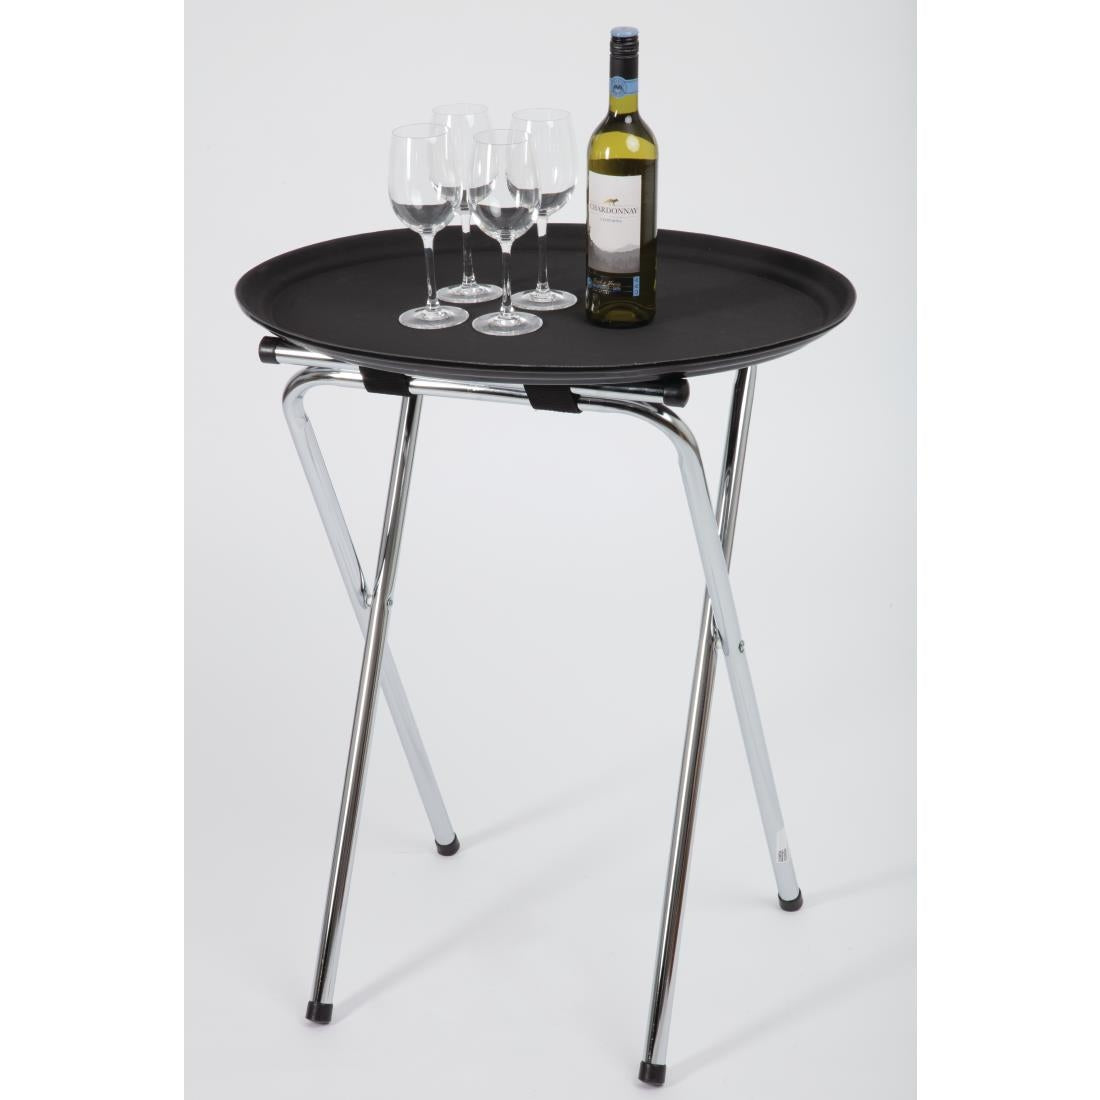 Kristallon Chrome-Plated Steel Folding Tray Stand JD Catering Equipment Solutions Ltd